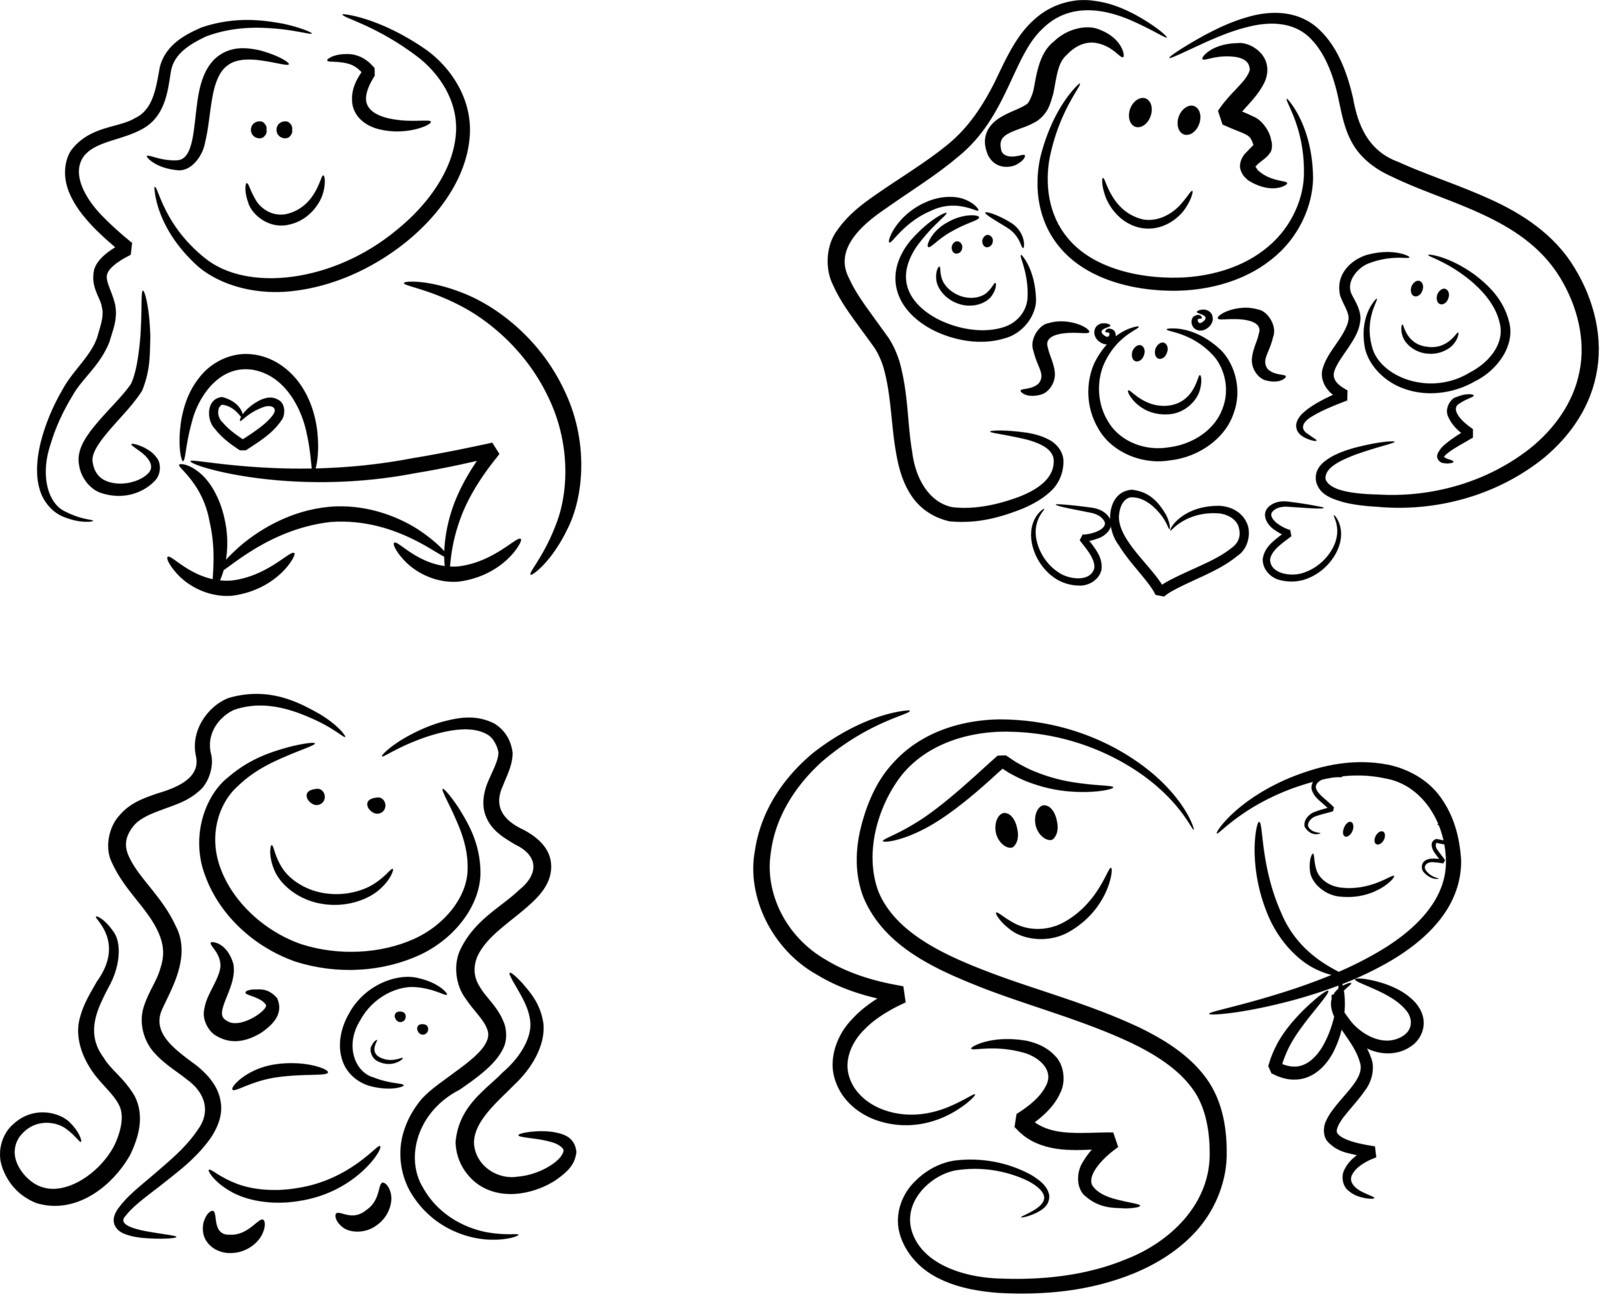 Mother love / mother and child icons  by Silberschuh